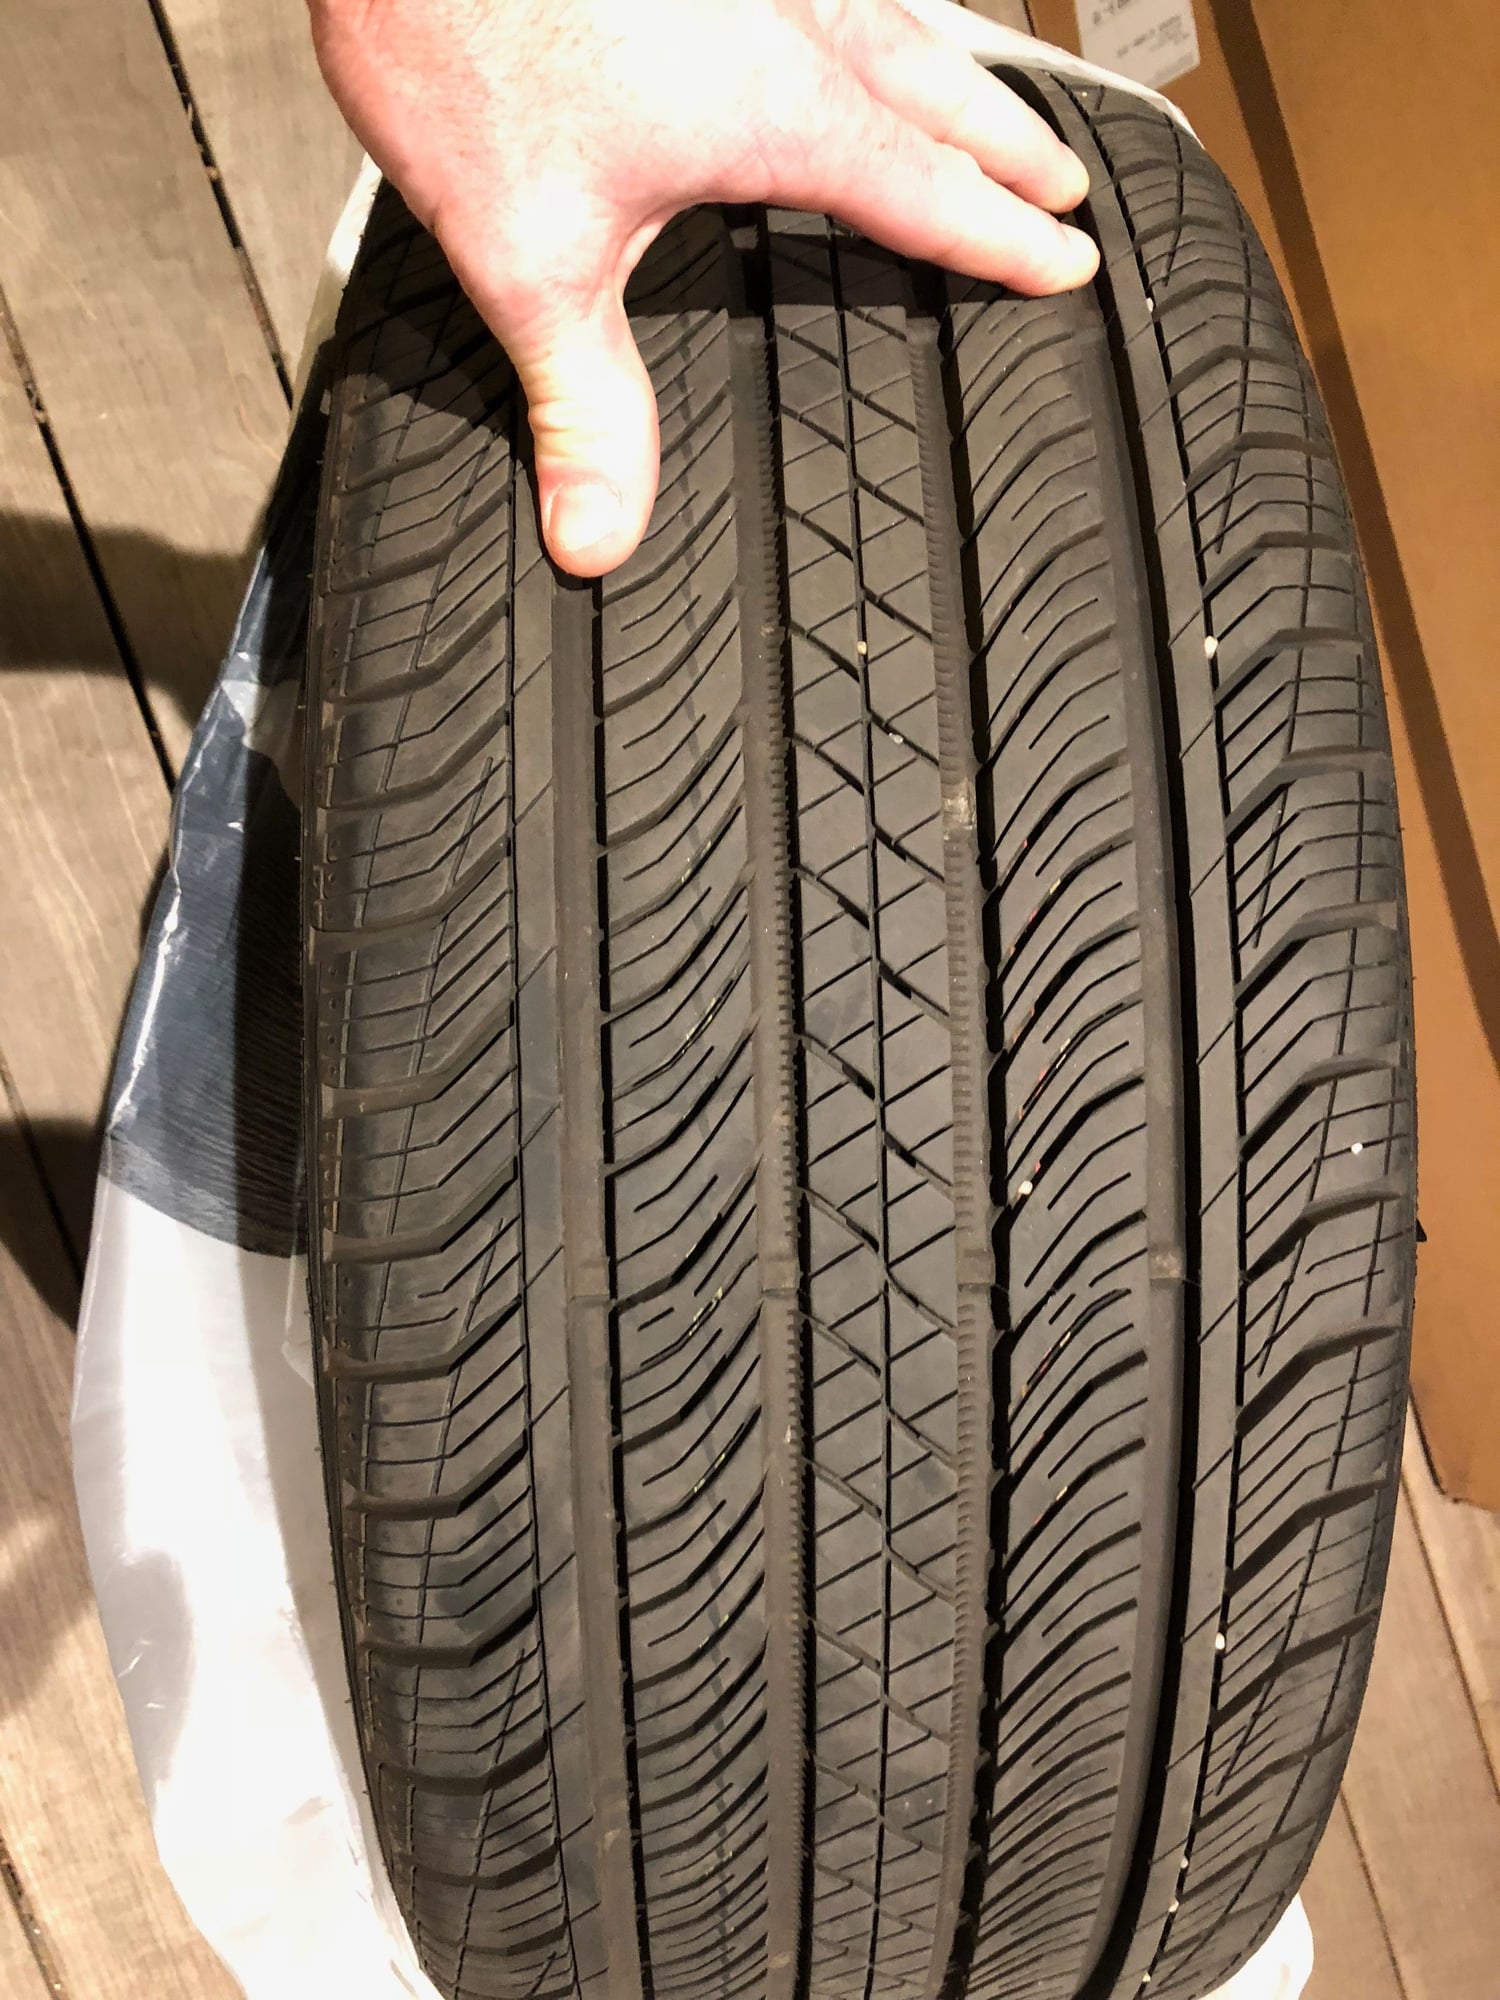 Wheels and Tires/Axles - Factory Conti ProContact A4 Allroad Tires (~1k miles) - Used - 2016 to 2020 Audi A4 allroad - Boulder, CO 80302, United States